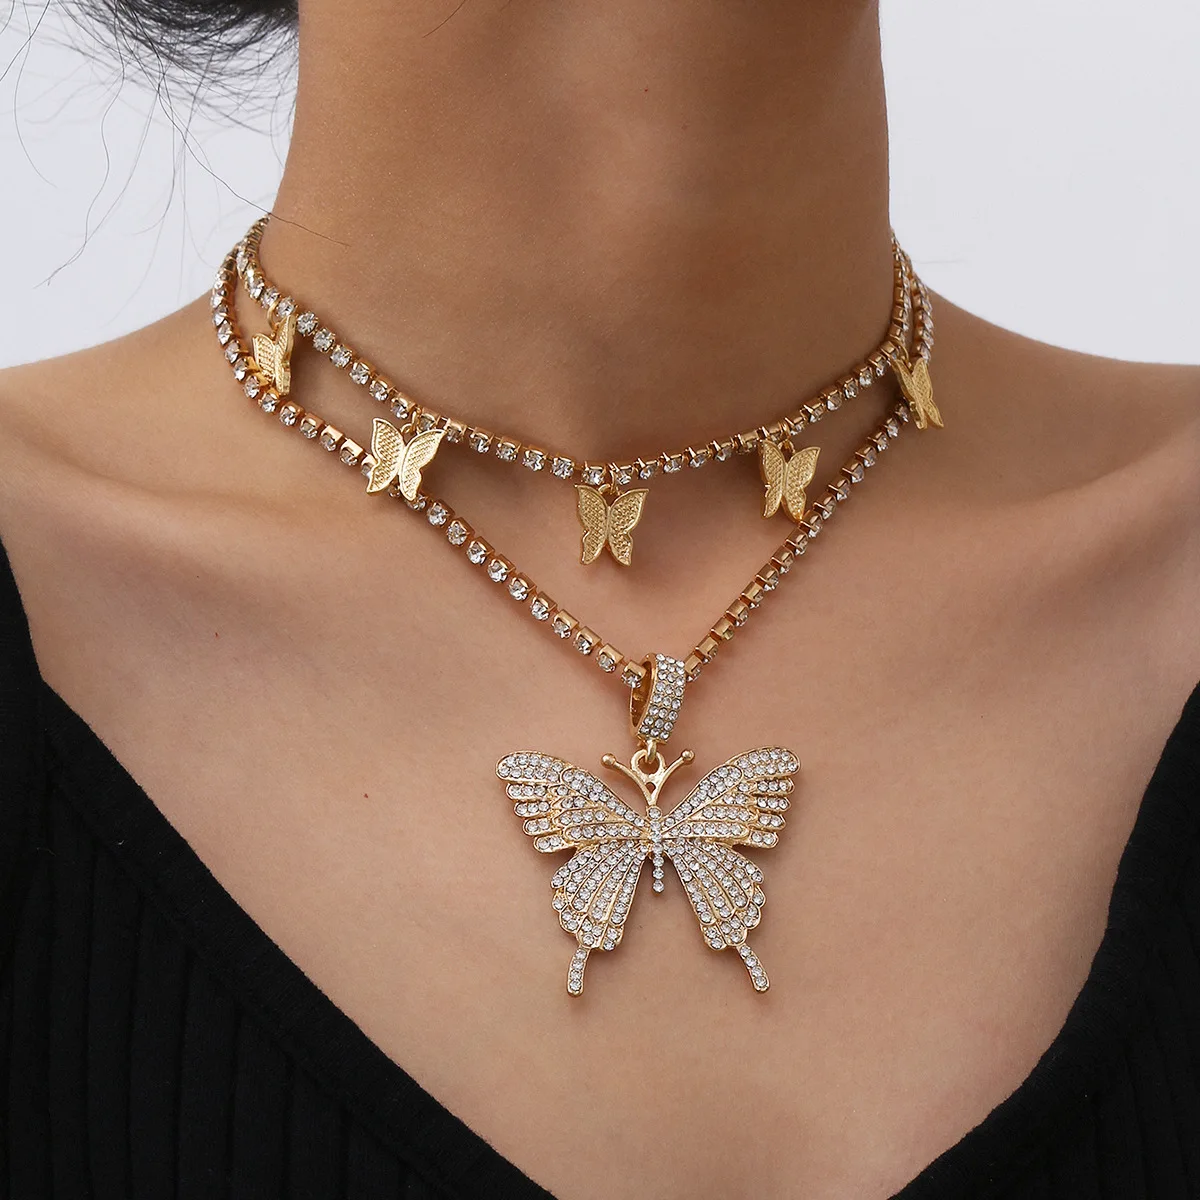 Clearance Paymenow Women Necklace Jewelry Crystals Butterfly Necklace Elegant Rhinstone Chain Gifts for Her Girlfriend Mom 